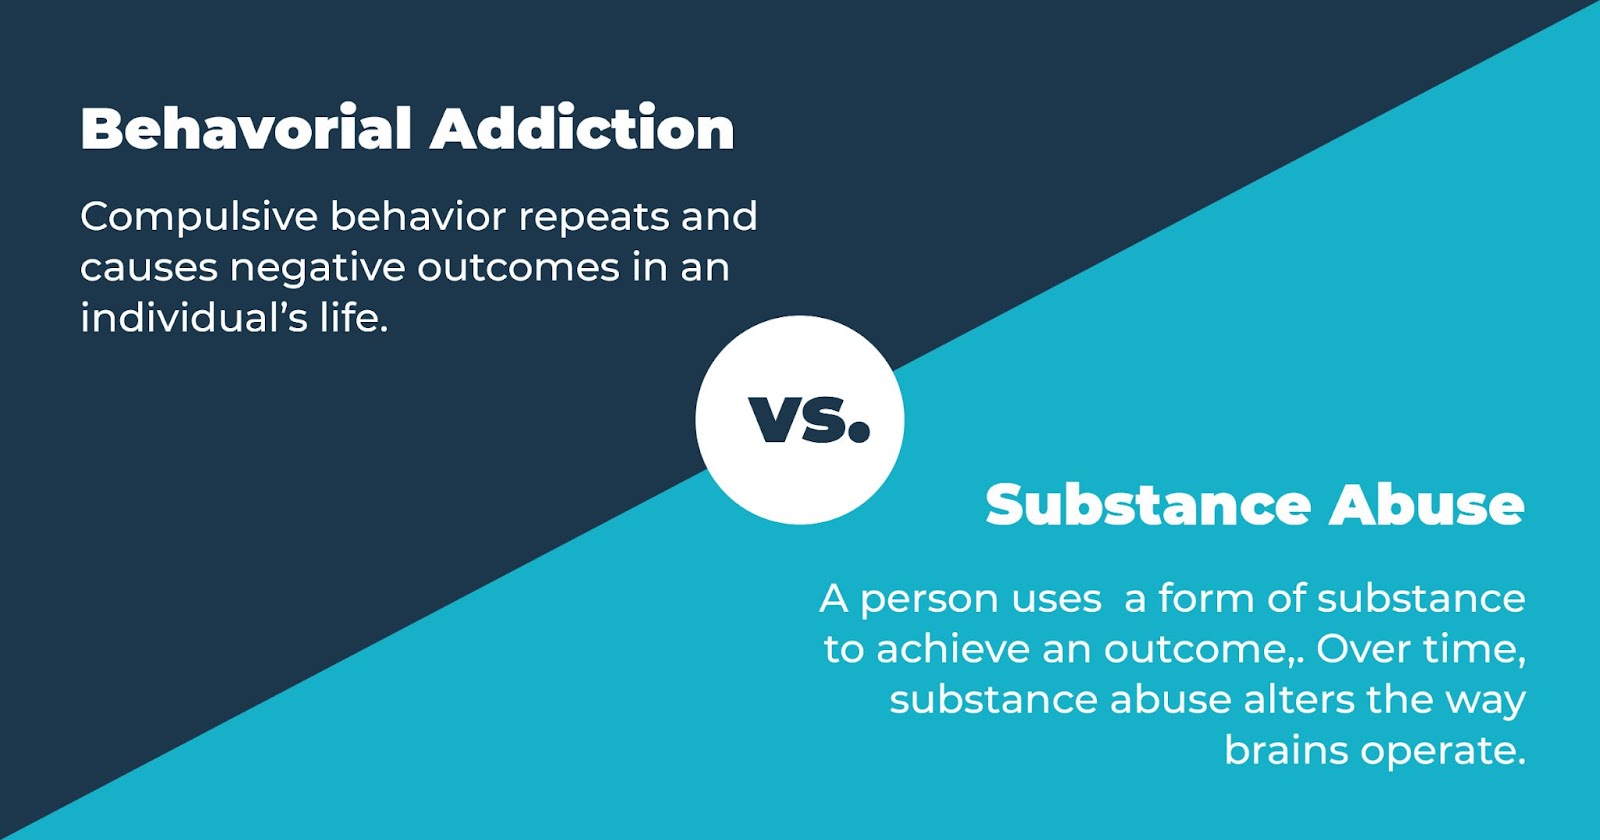 behavioral addiction compulsive behavior repeats and causes negative outcomes in an individual's life vs substance abuse a person who uses a form of substance to achieve an outcome, over time, substance abuse alters the way brains operate